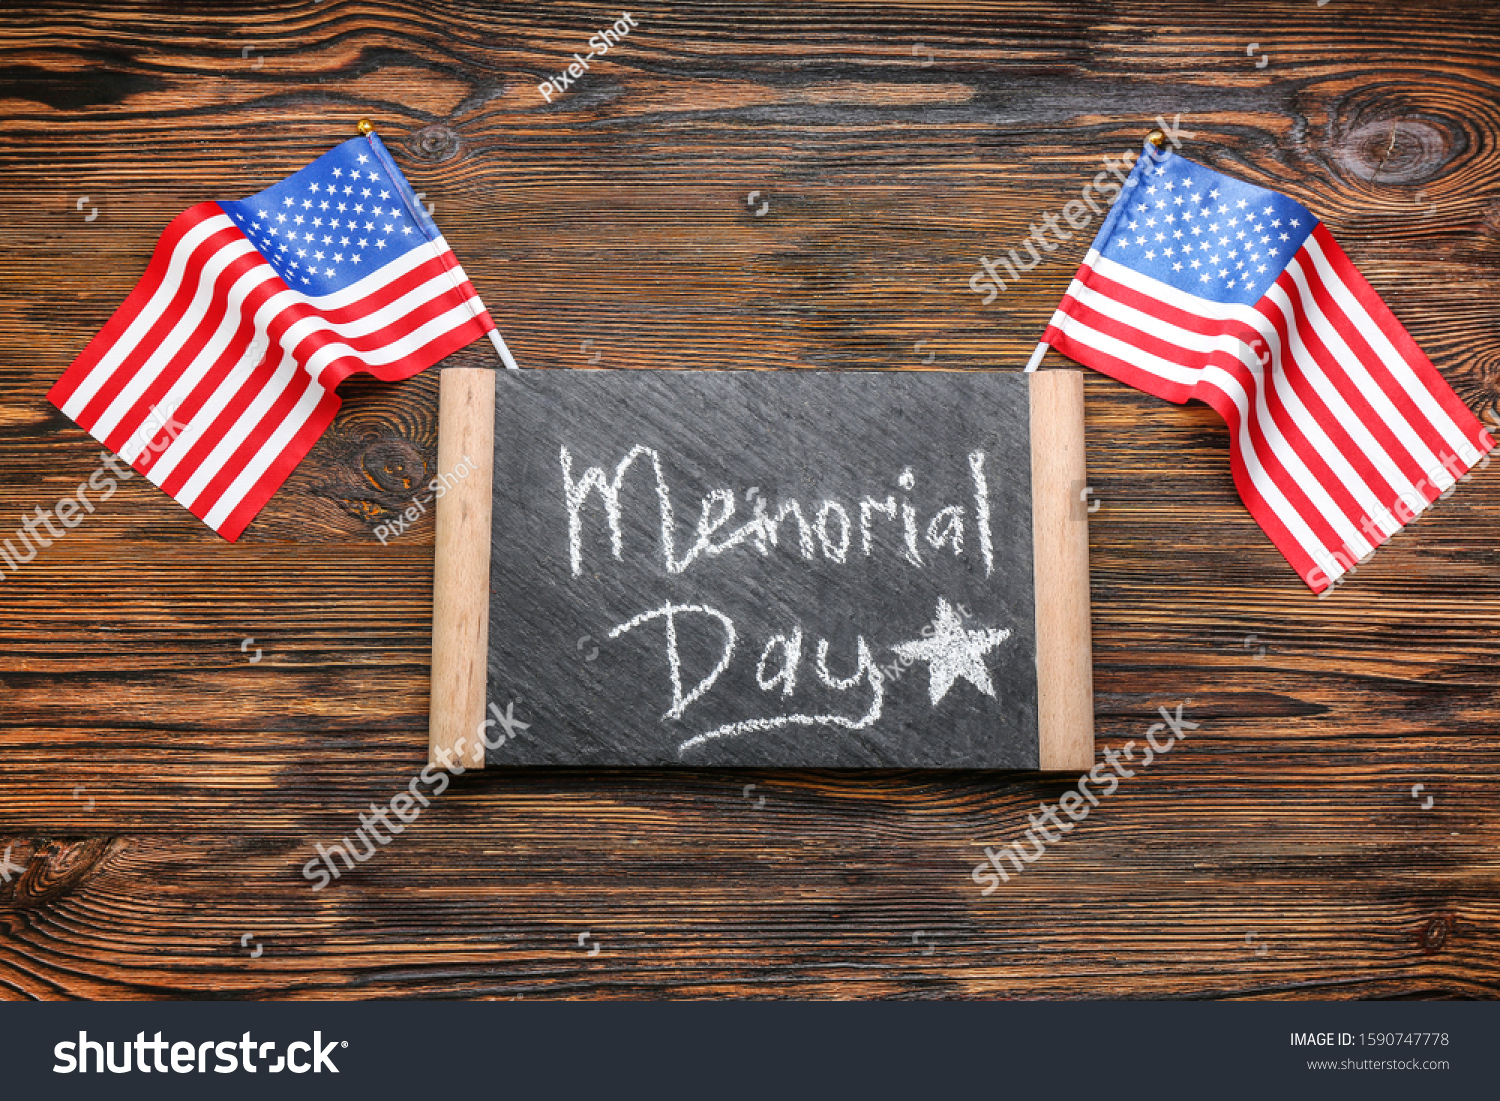 Chalkboard with text MEMORIAL DAY and USA flags on wooden background #1590747778